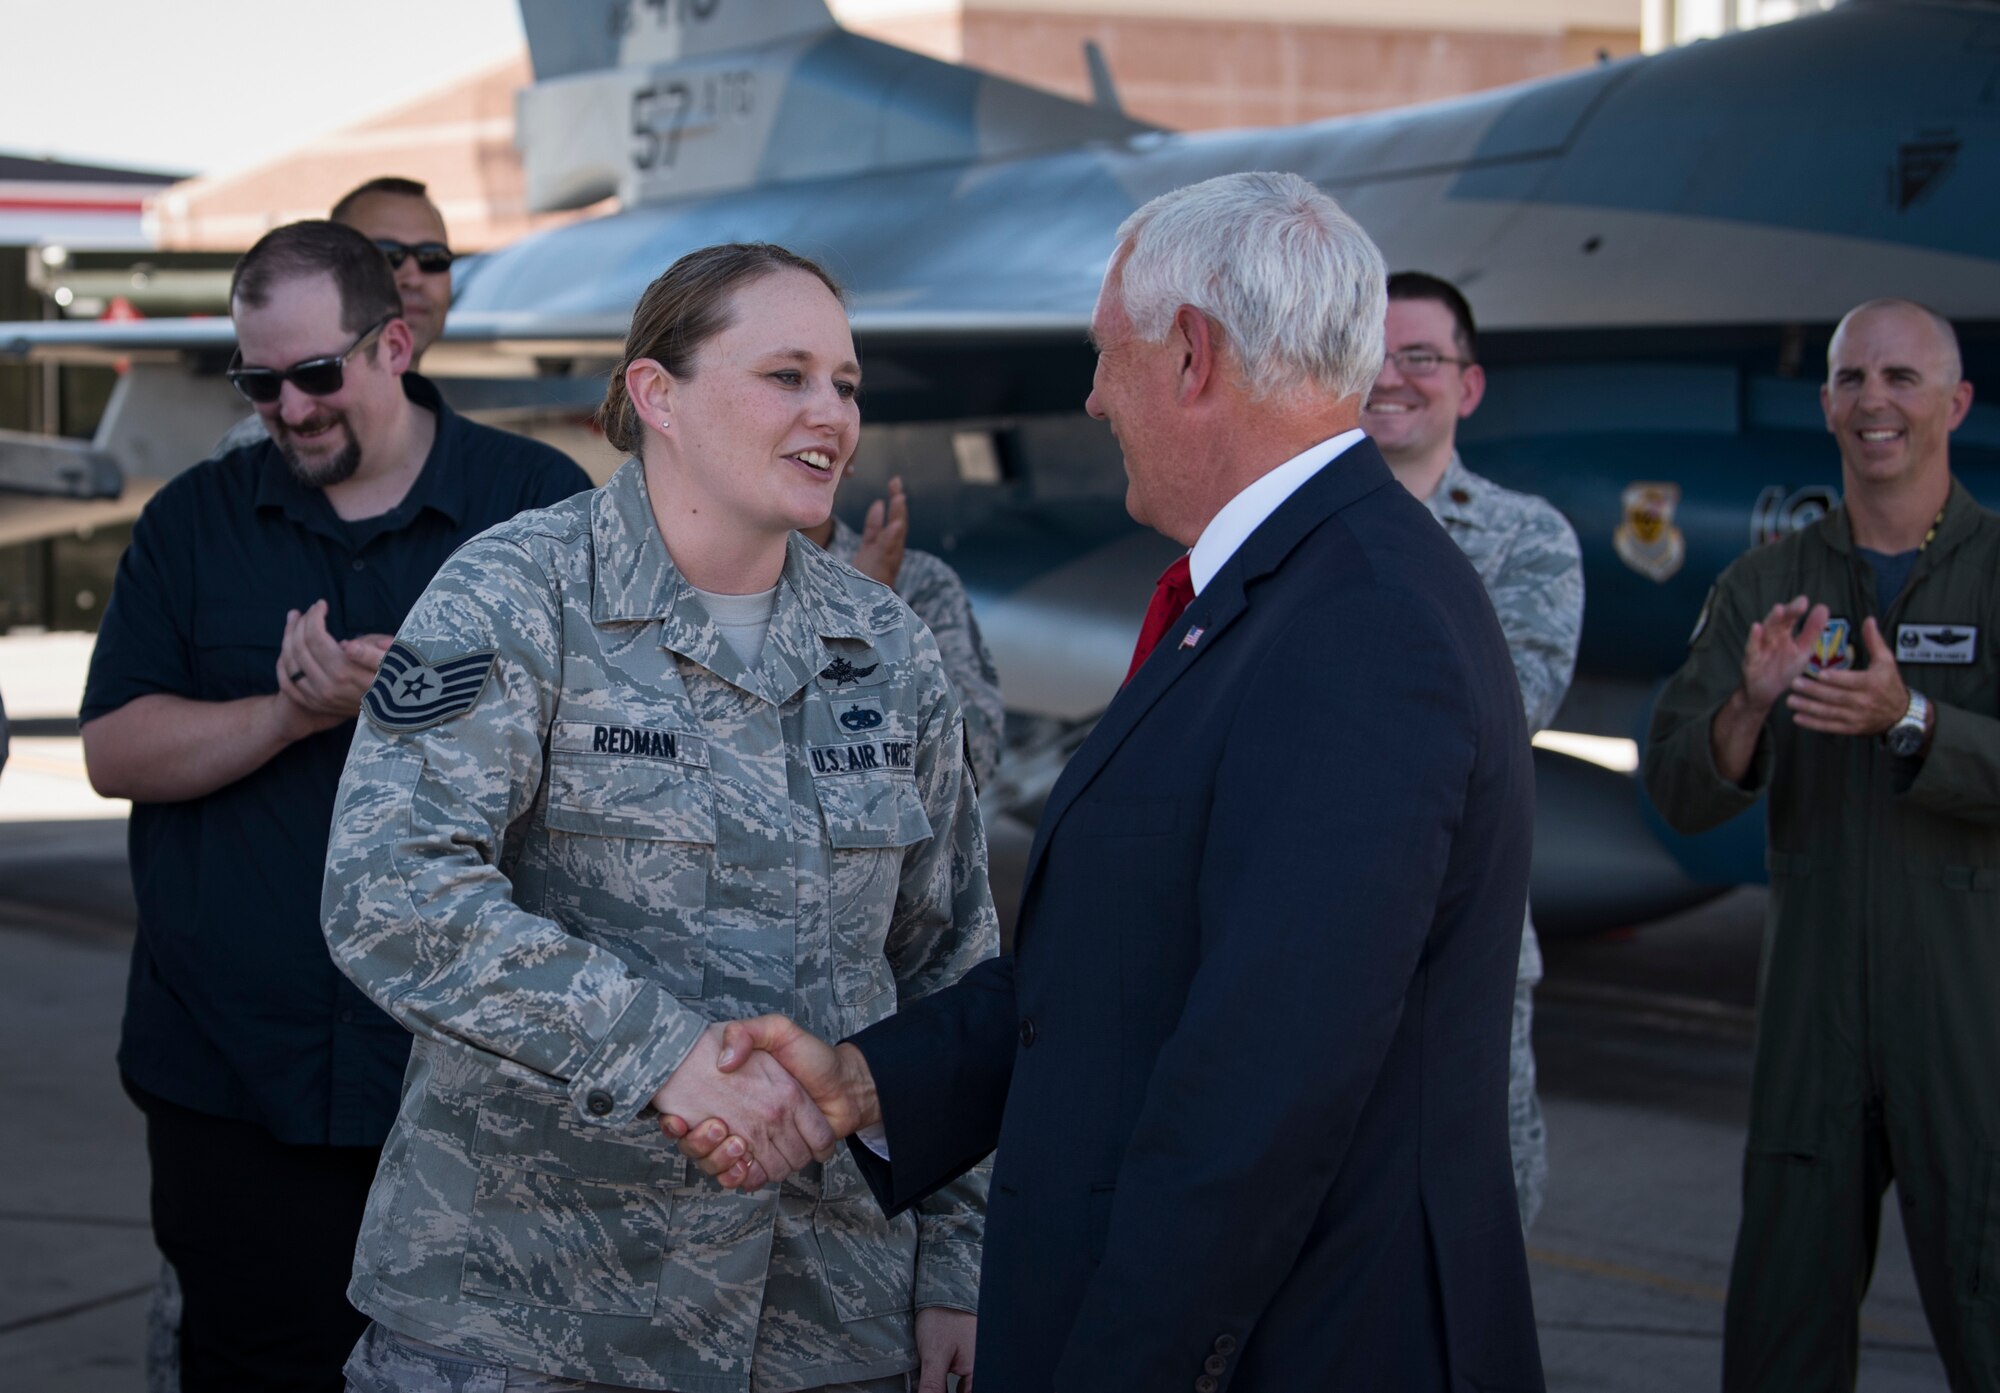 Vice President Mike Pence congratulates Tech. Sgt. Vanessa Redman, 32nd Weapons Squadron NCO in charge, on her Stripes for Exceptional Performers (STEP) promotion moments prior at Nellis Air Force Base, Nevada, Sept. 7, 2018. Pence and Brig. Gen. Robert Novotny, 57th Wing commander, surprised her with the promotion during Pence’s visit. (U.S. Air Force photo by Airman 1st Class Andrew D. Sarver)